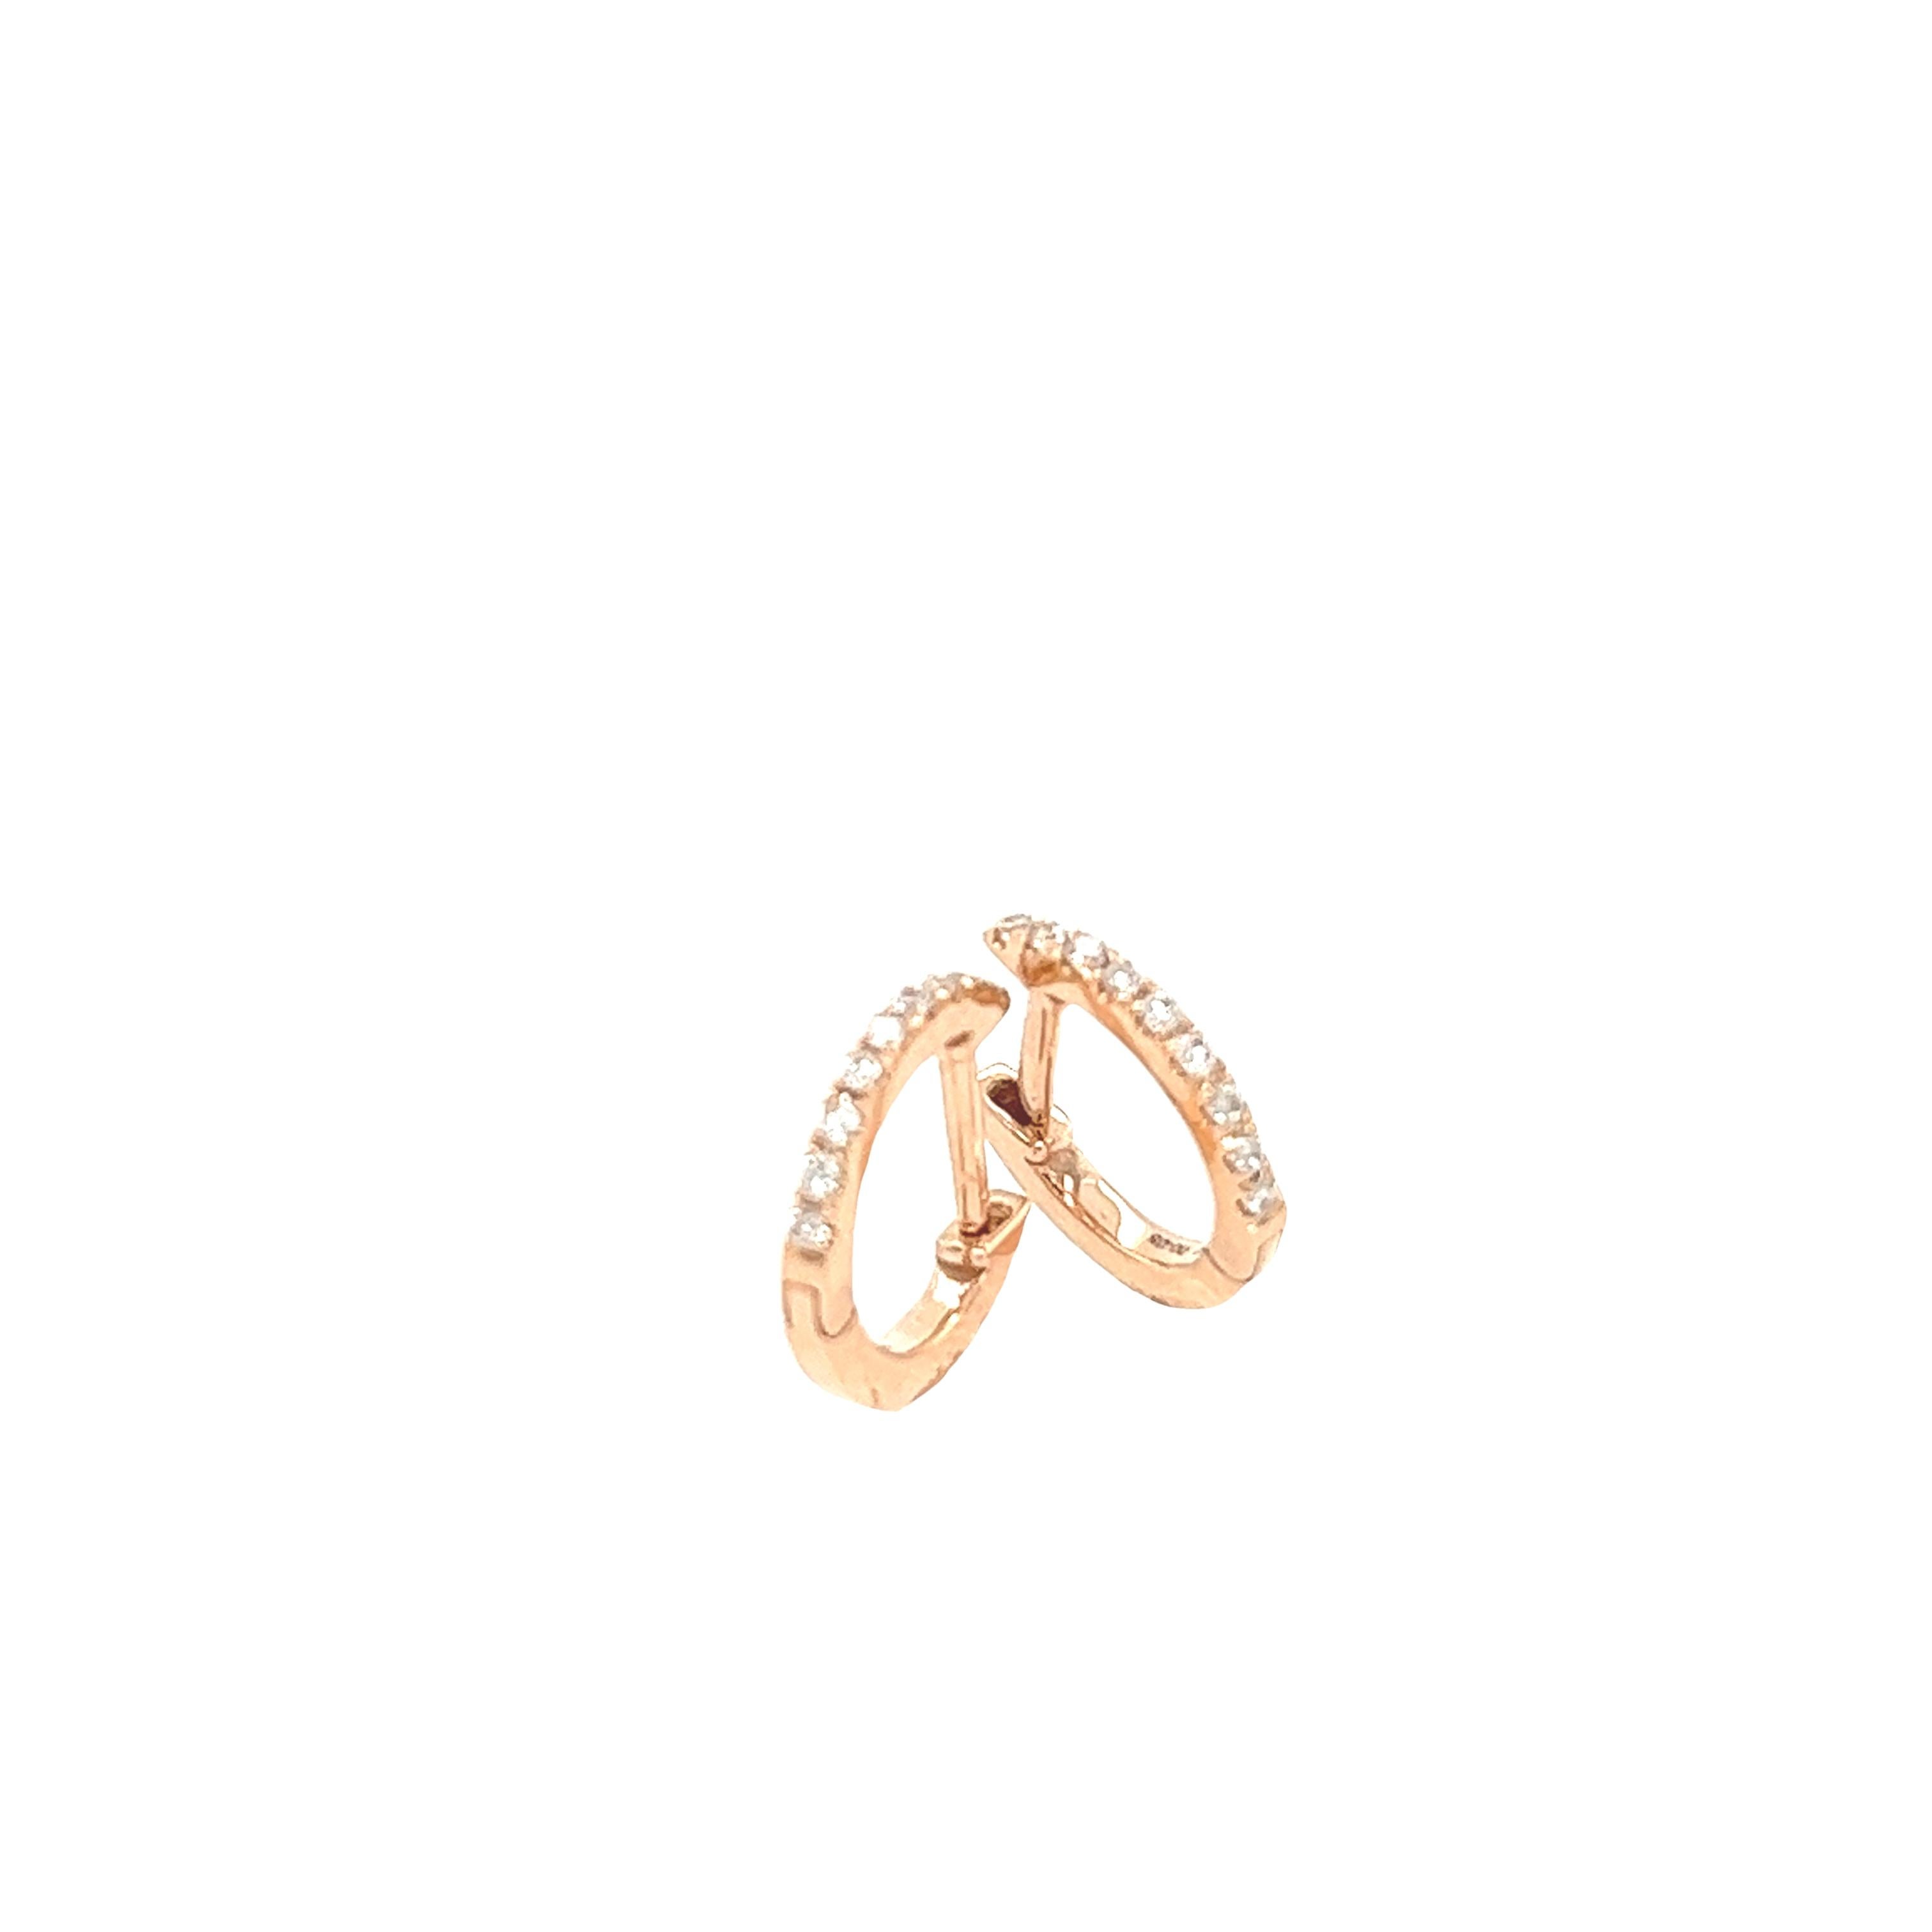 18ct Rose Gold Diamond Hoop Earrings, Set With 0.08ct Of Round Diamonds, 9mm For Sale 1